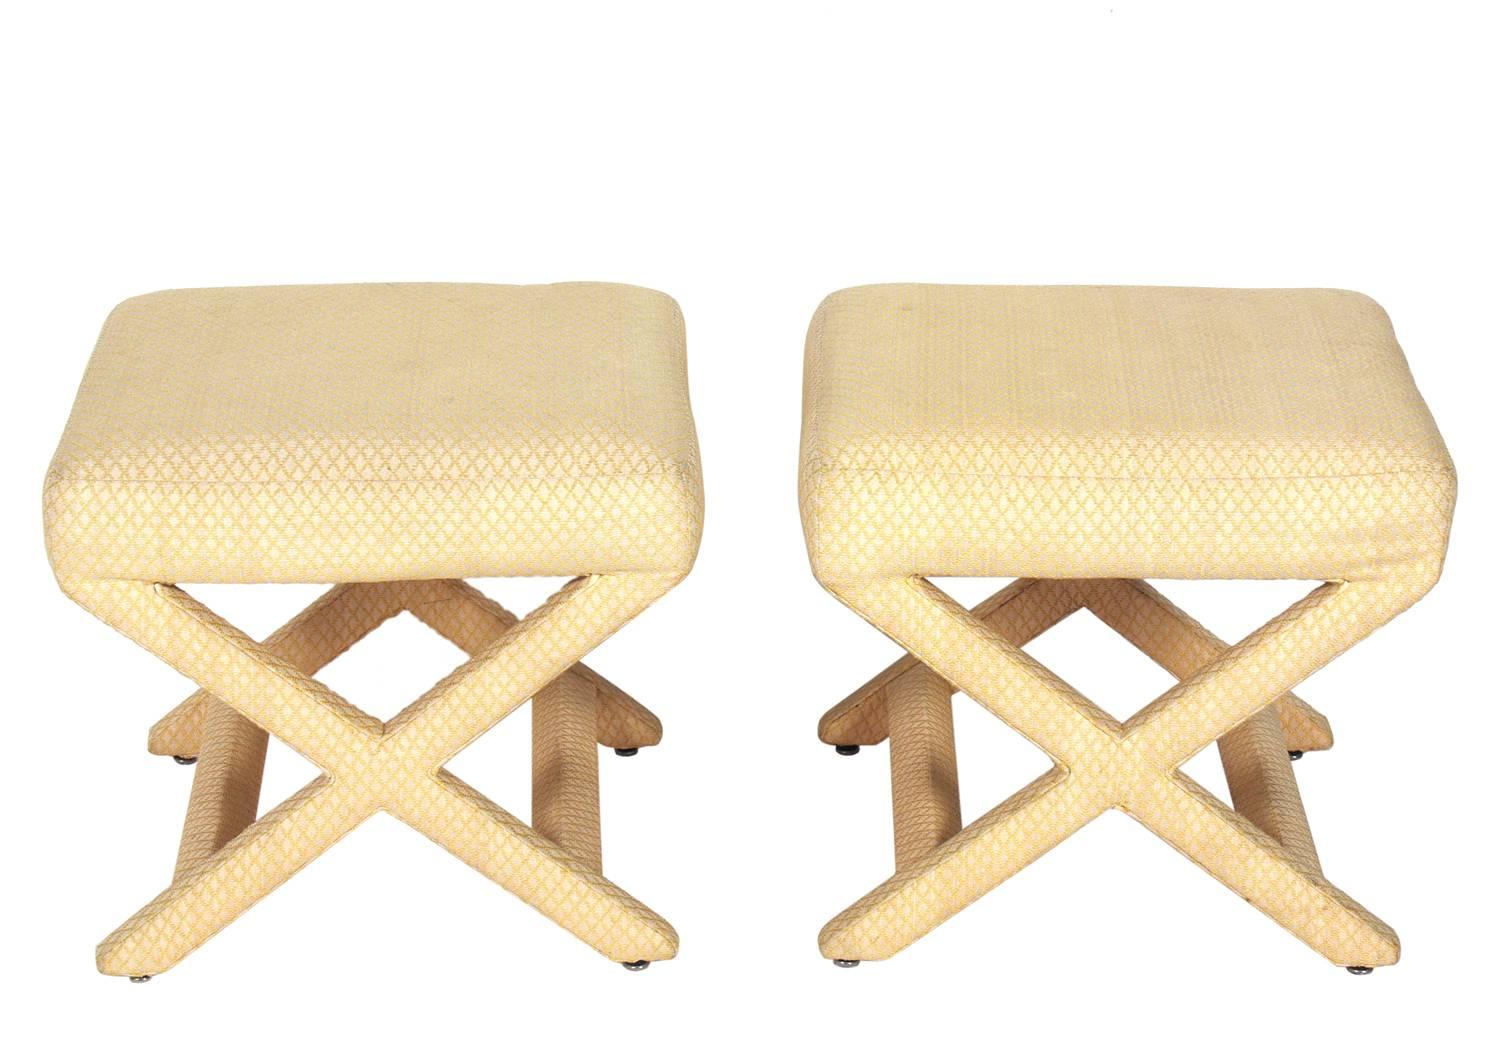 Pair of upholstered X-stools, American, circa 1960s. They retain their original fabric. The fabric has some faint spots and can be used as is, or we can reupholster them in your fabric for an additional $500 for the pair.